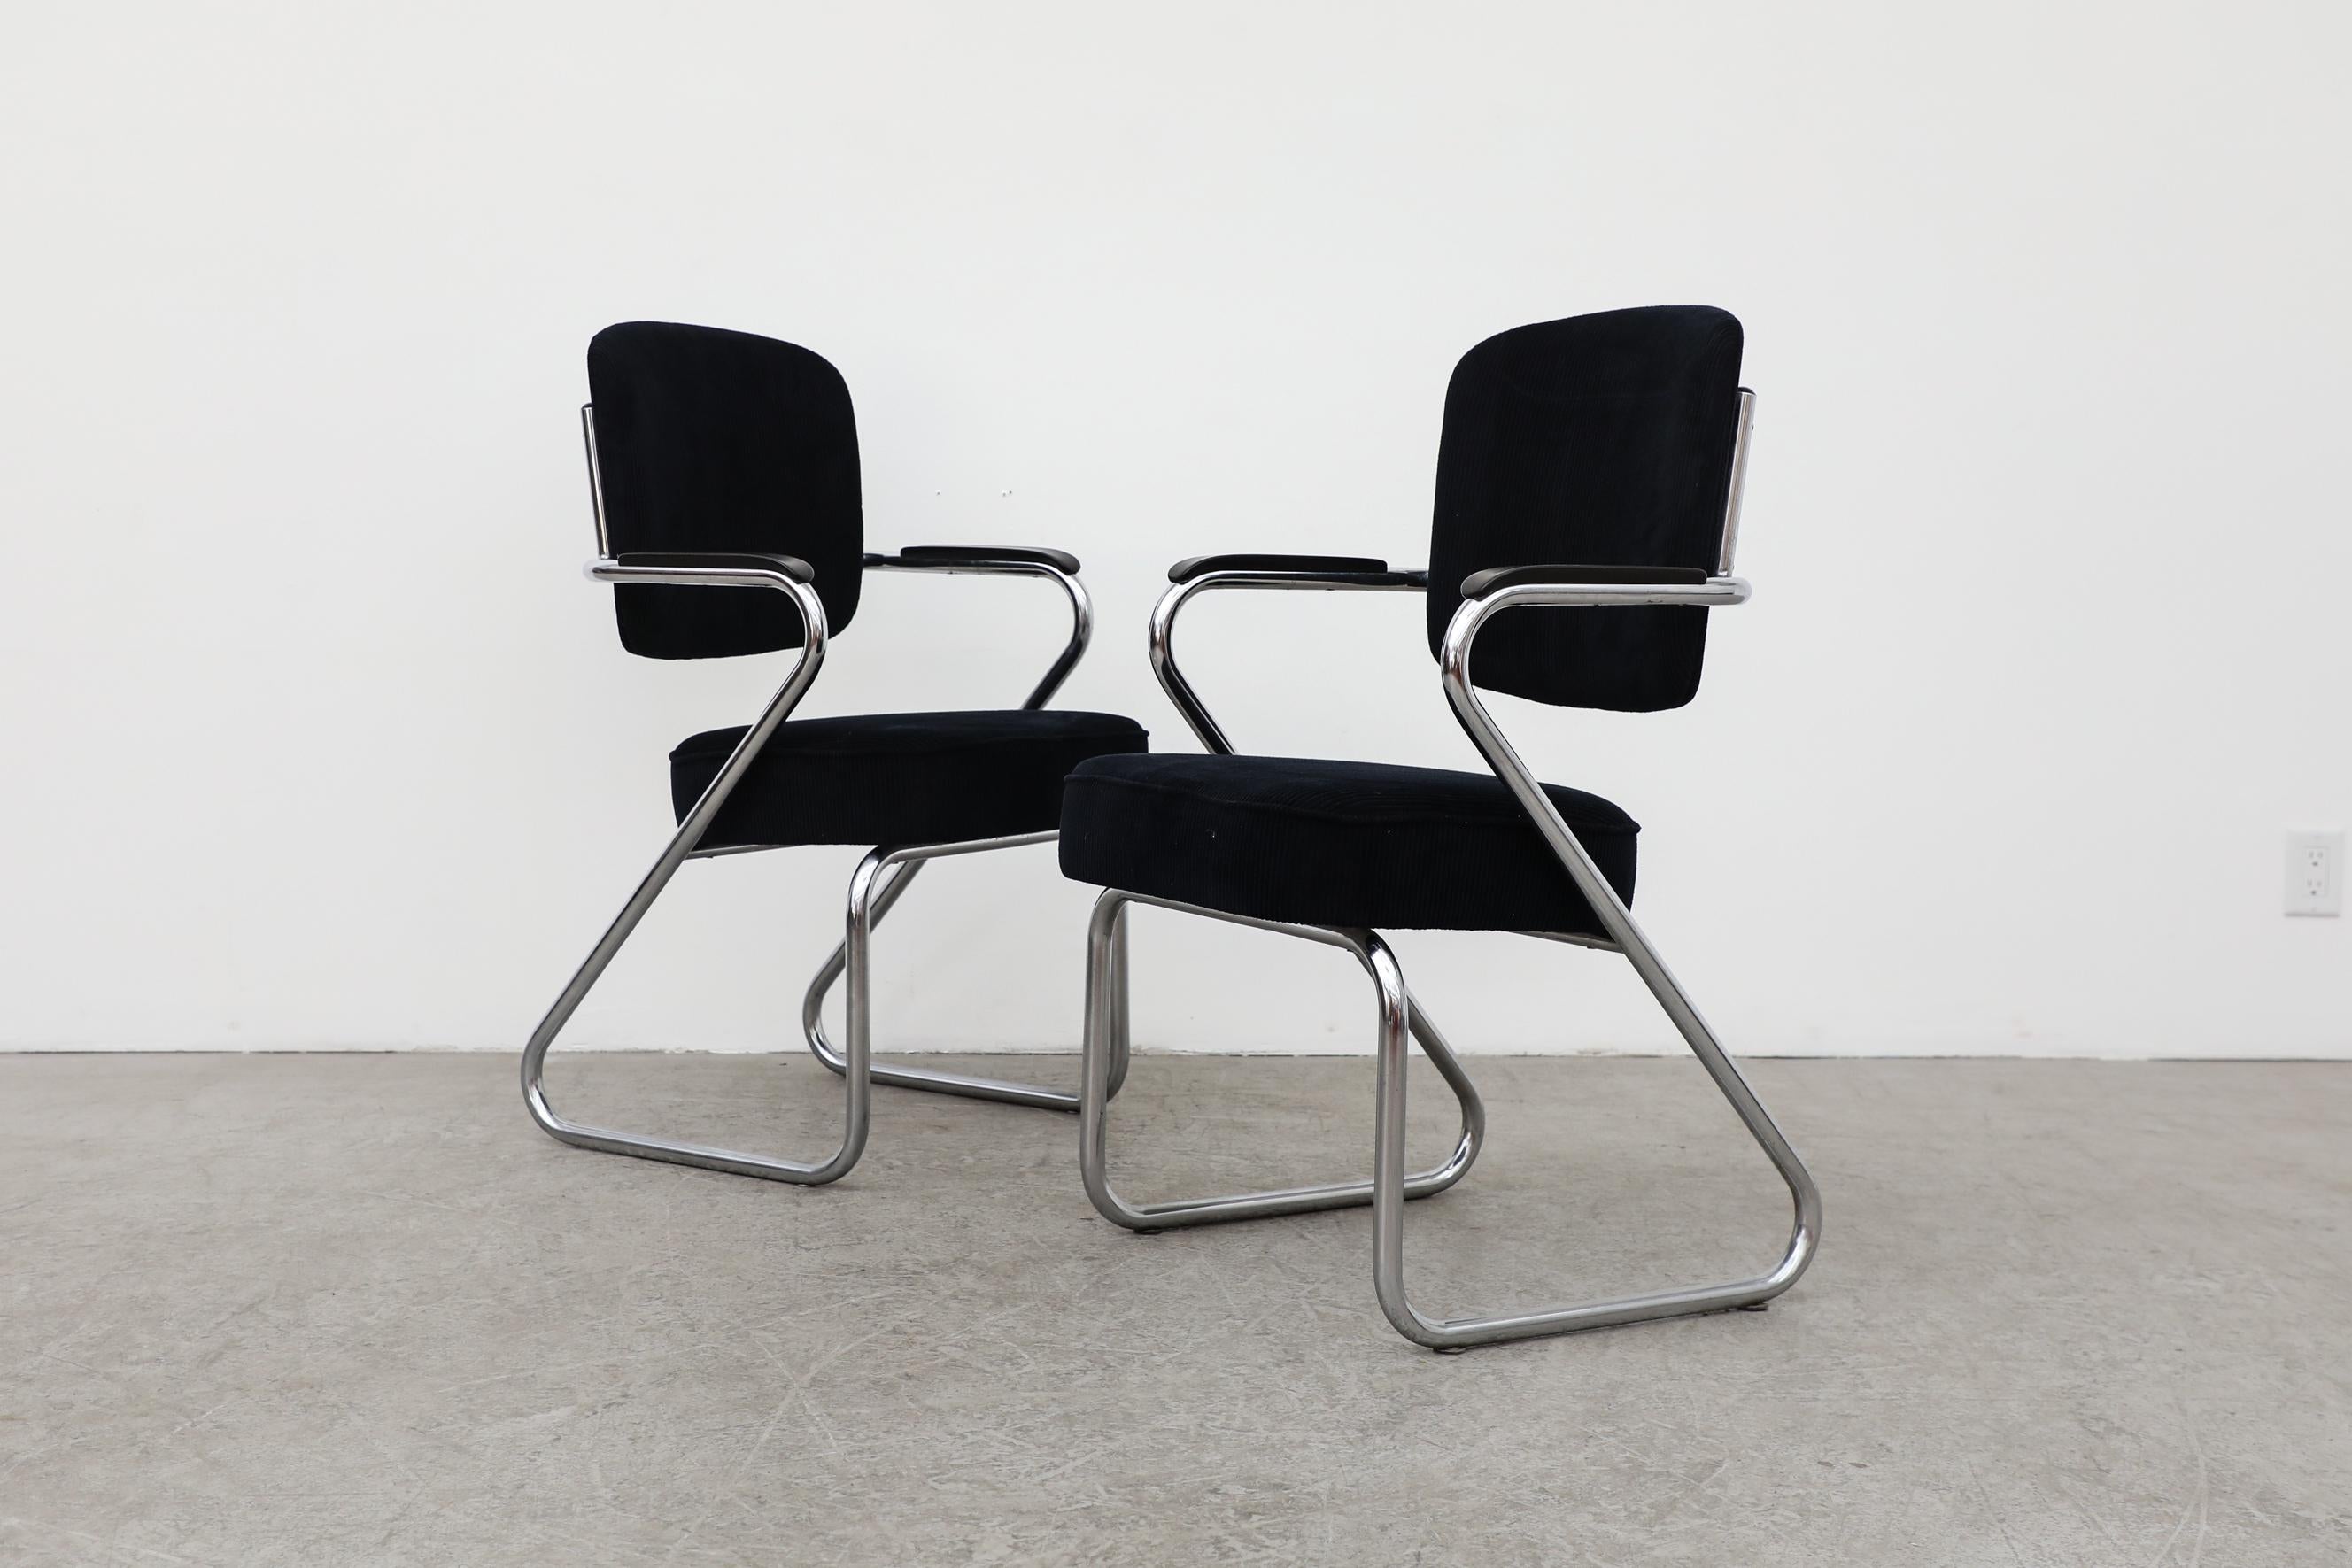 1950s Black Corduroy & Chrome Chairs by Paul Schuitema for Fana Metaal Rotterdam For Sale 1